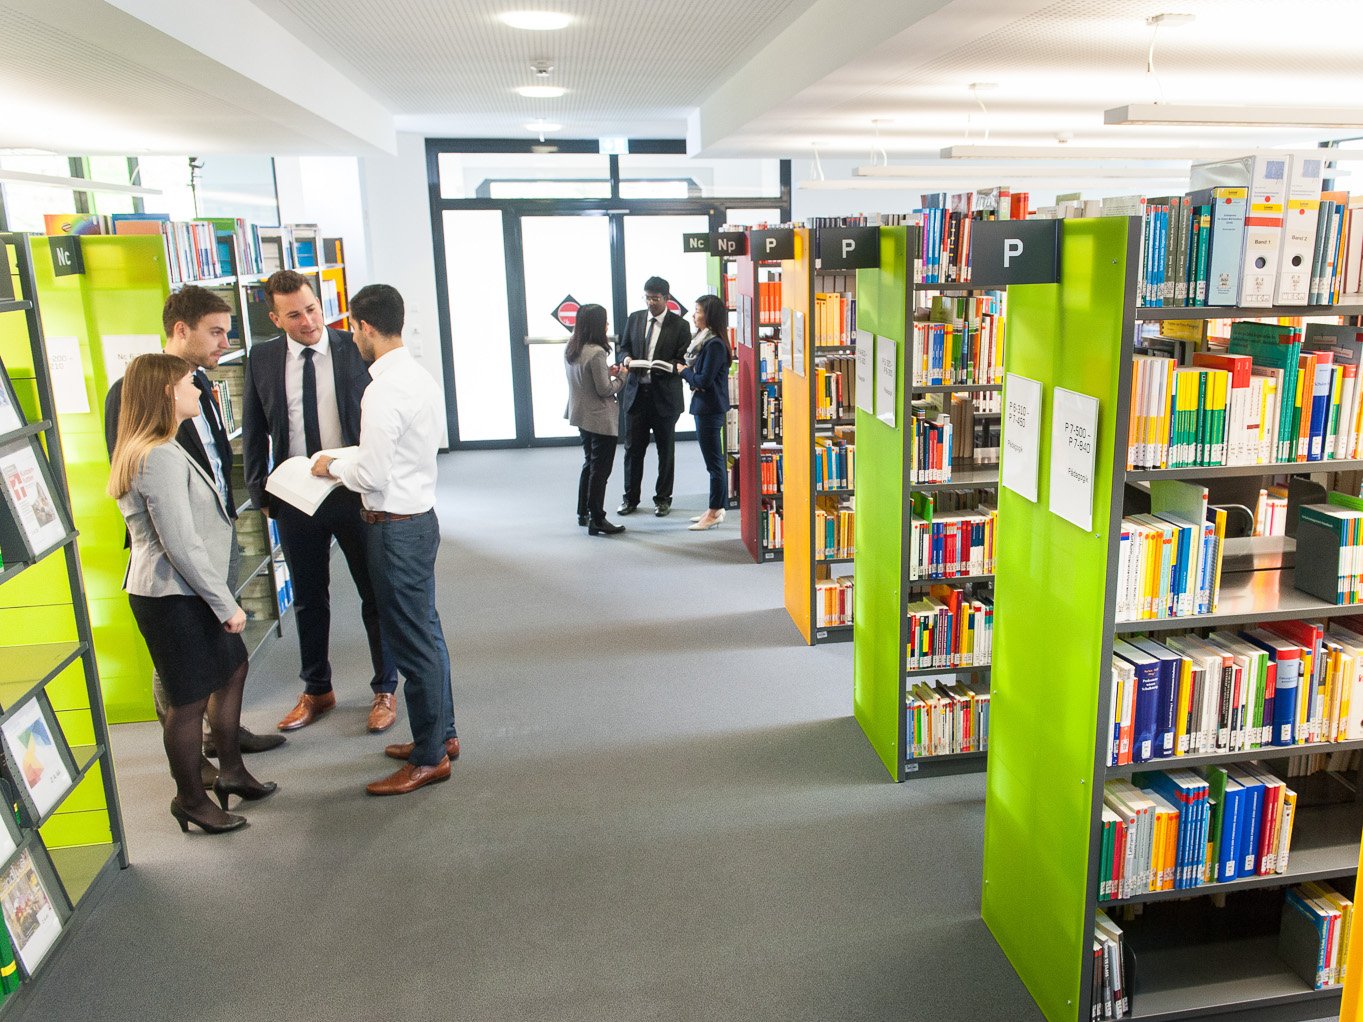 International Purchasing Management ESB Business School students interacting with each other in the library.